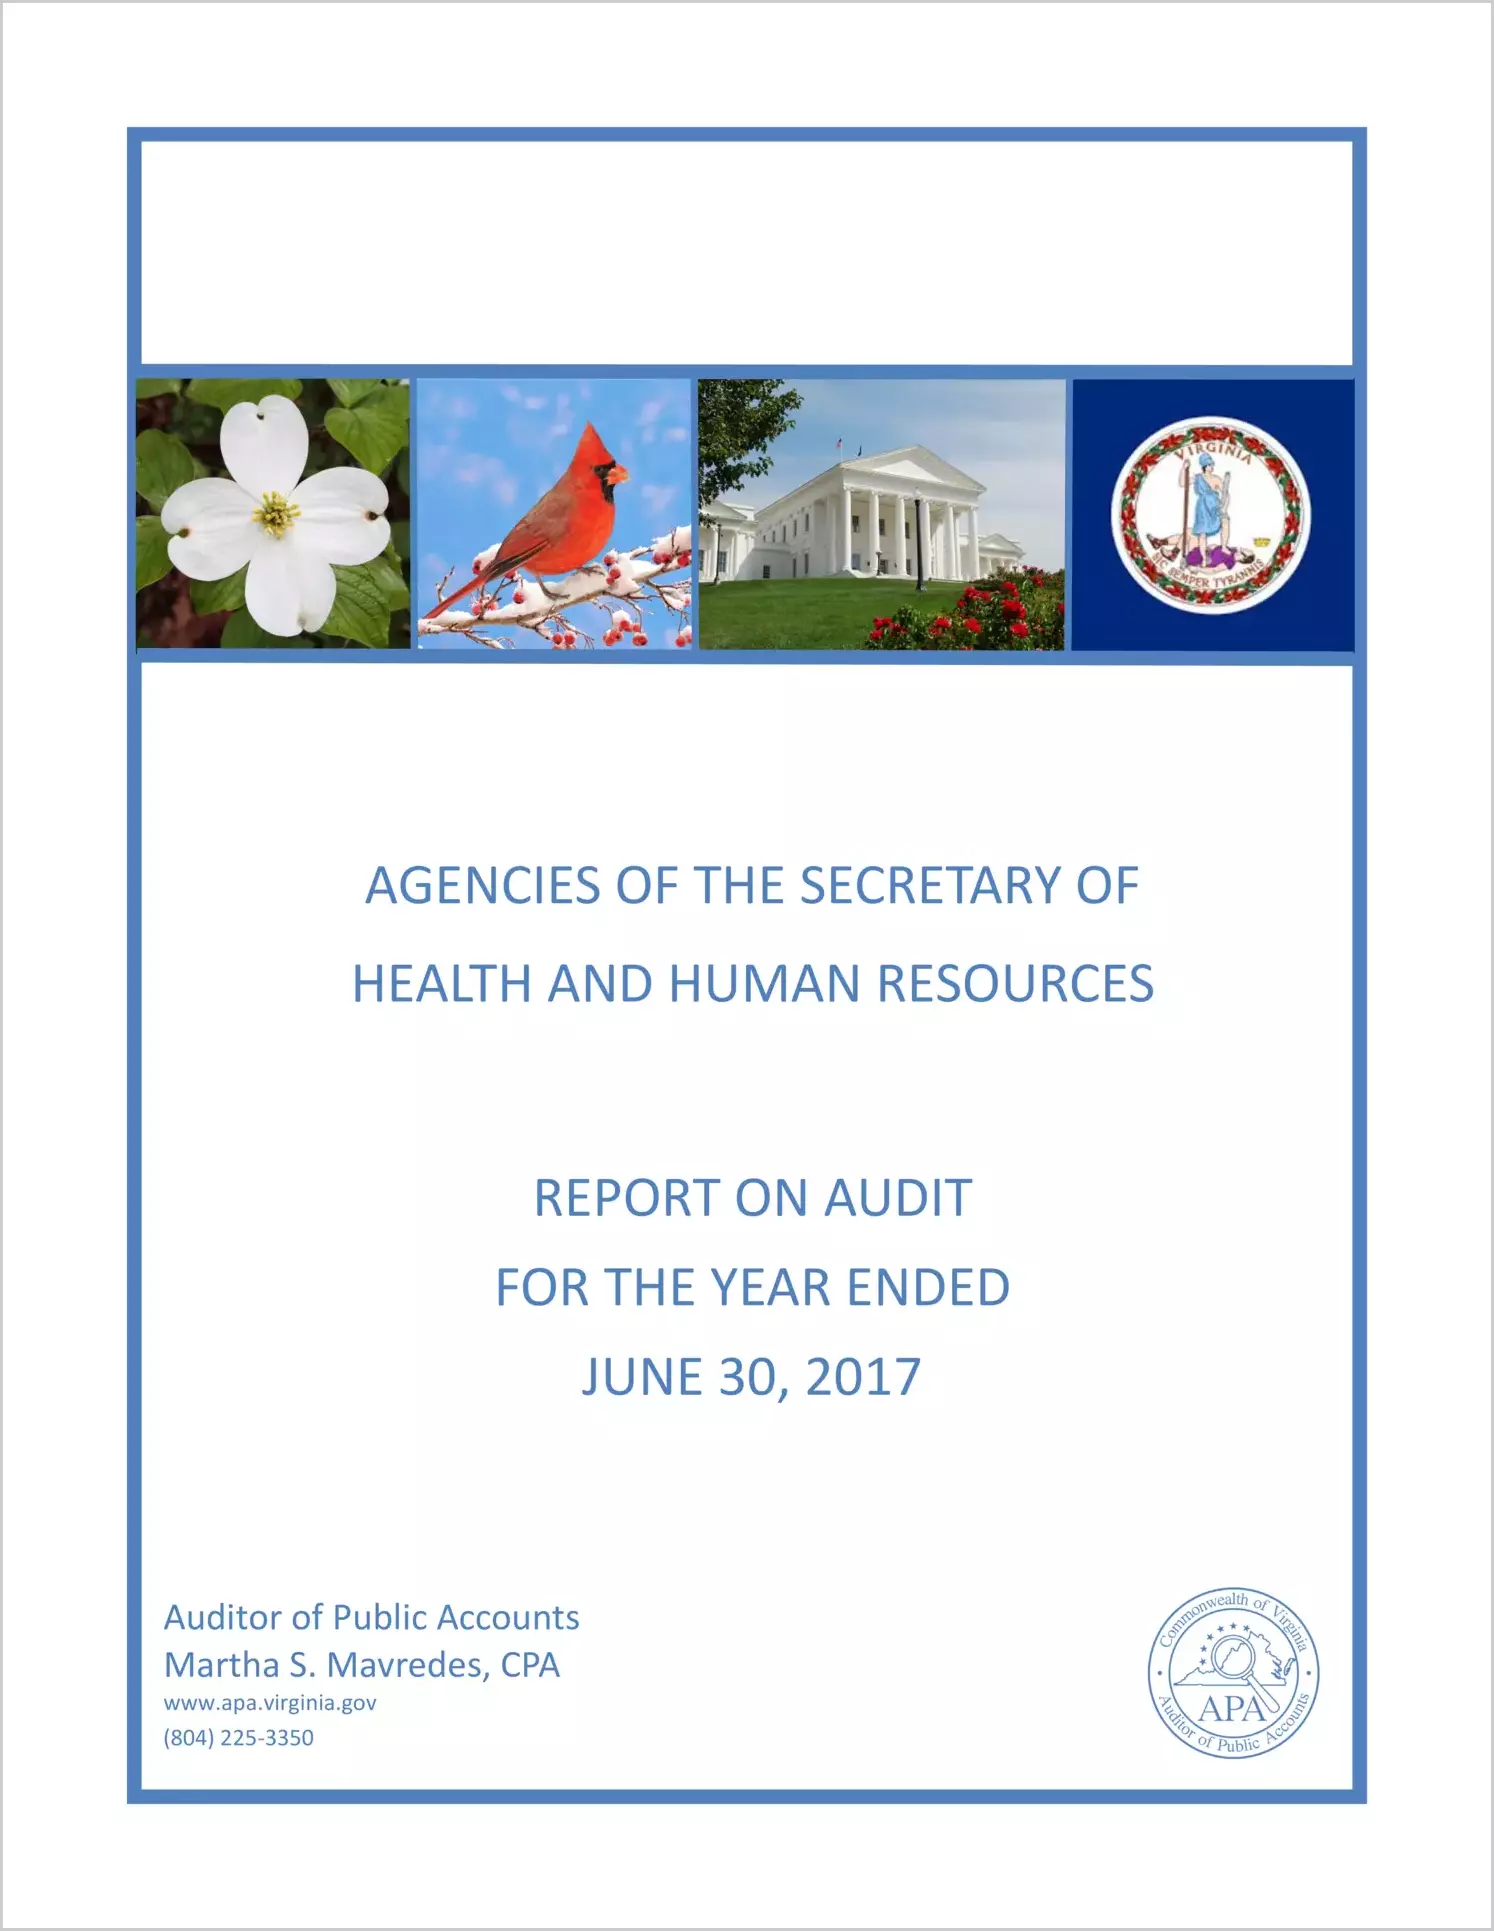 Agencies of the Secretary of Health and Human Resources for the year ended June 30, 2017